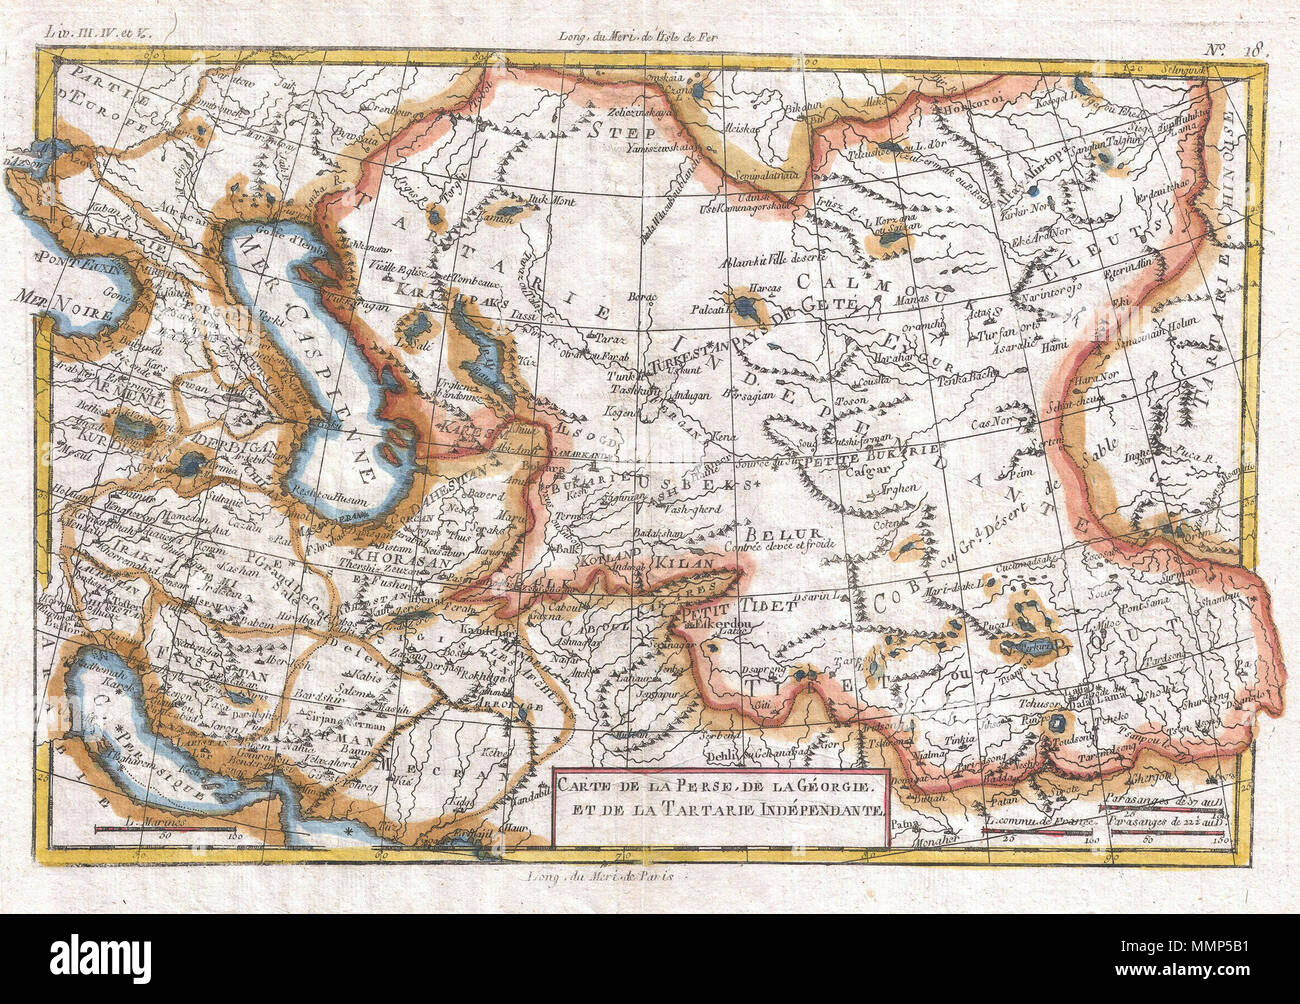 .  English: A fine example of Rigobert Bonne and Guilleme Raynal’s 1780 map of Central Asia. Focuses on the region once known as Tartarie Indépendante or Independent Tartary. This name was given to the great tract of land by Europeans in the middle ages, and included the land from the Caspian Sea and the Ural Mountains to China and India. This area was originally inhabited by Turkic and Mongol peoples of the Mongol Empire who were generically referred to as Tartars. This area includes the modern day countries of Uzbekistan, Kazakhstan, Turkmenistan and parts of Afghanistan, Pakistan, Iran, Tib Stock Photo